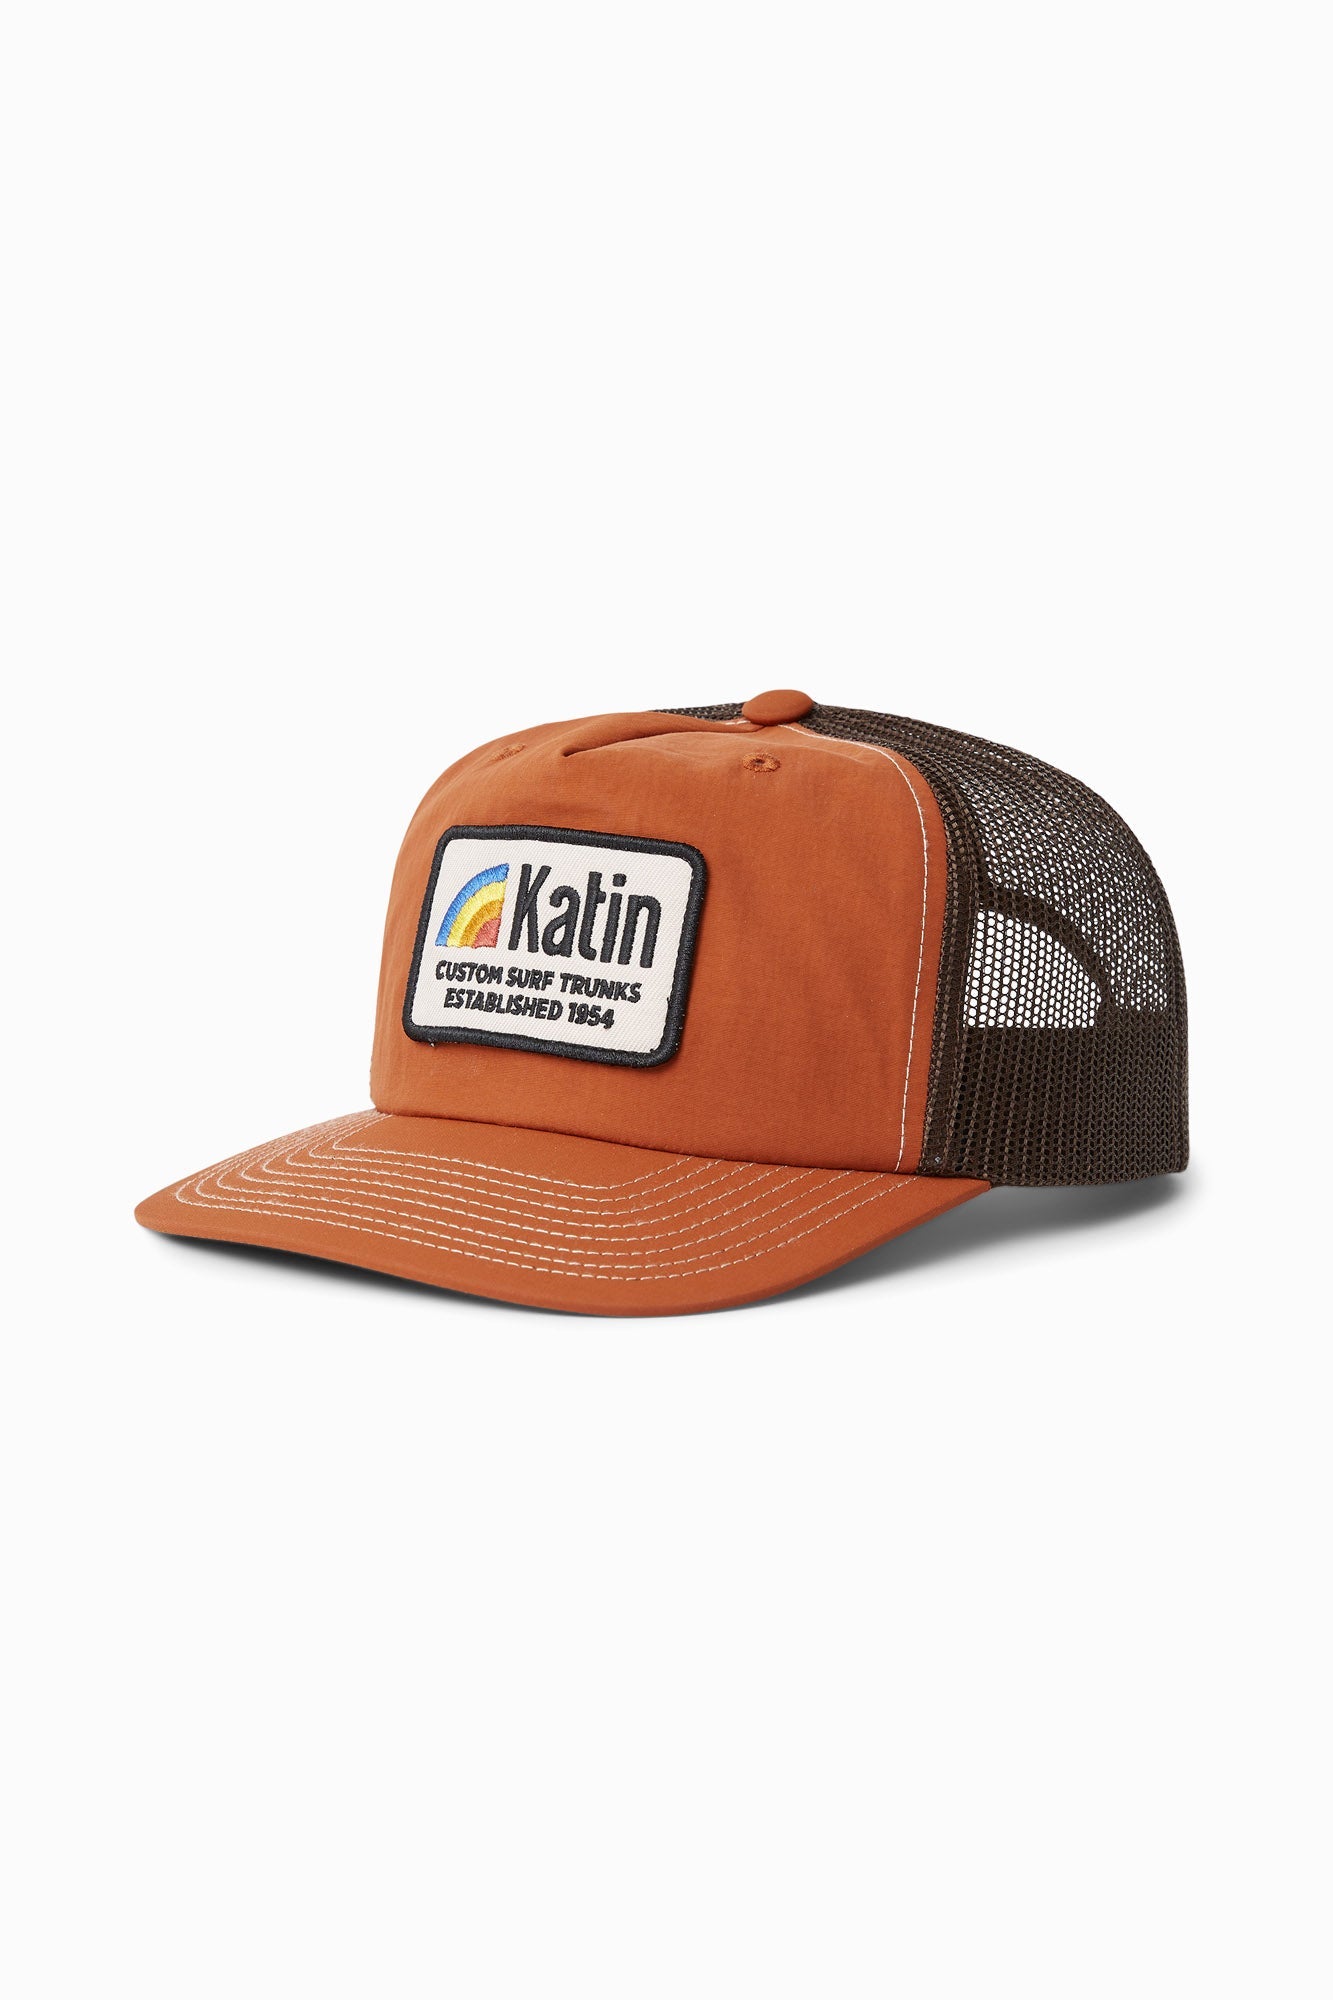 COUNTRY TRUCKER HAT